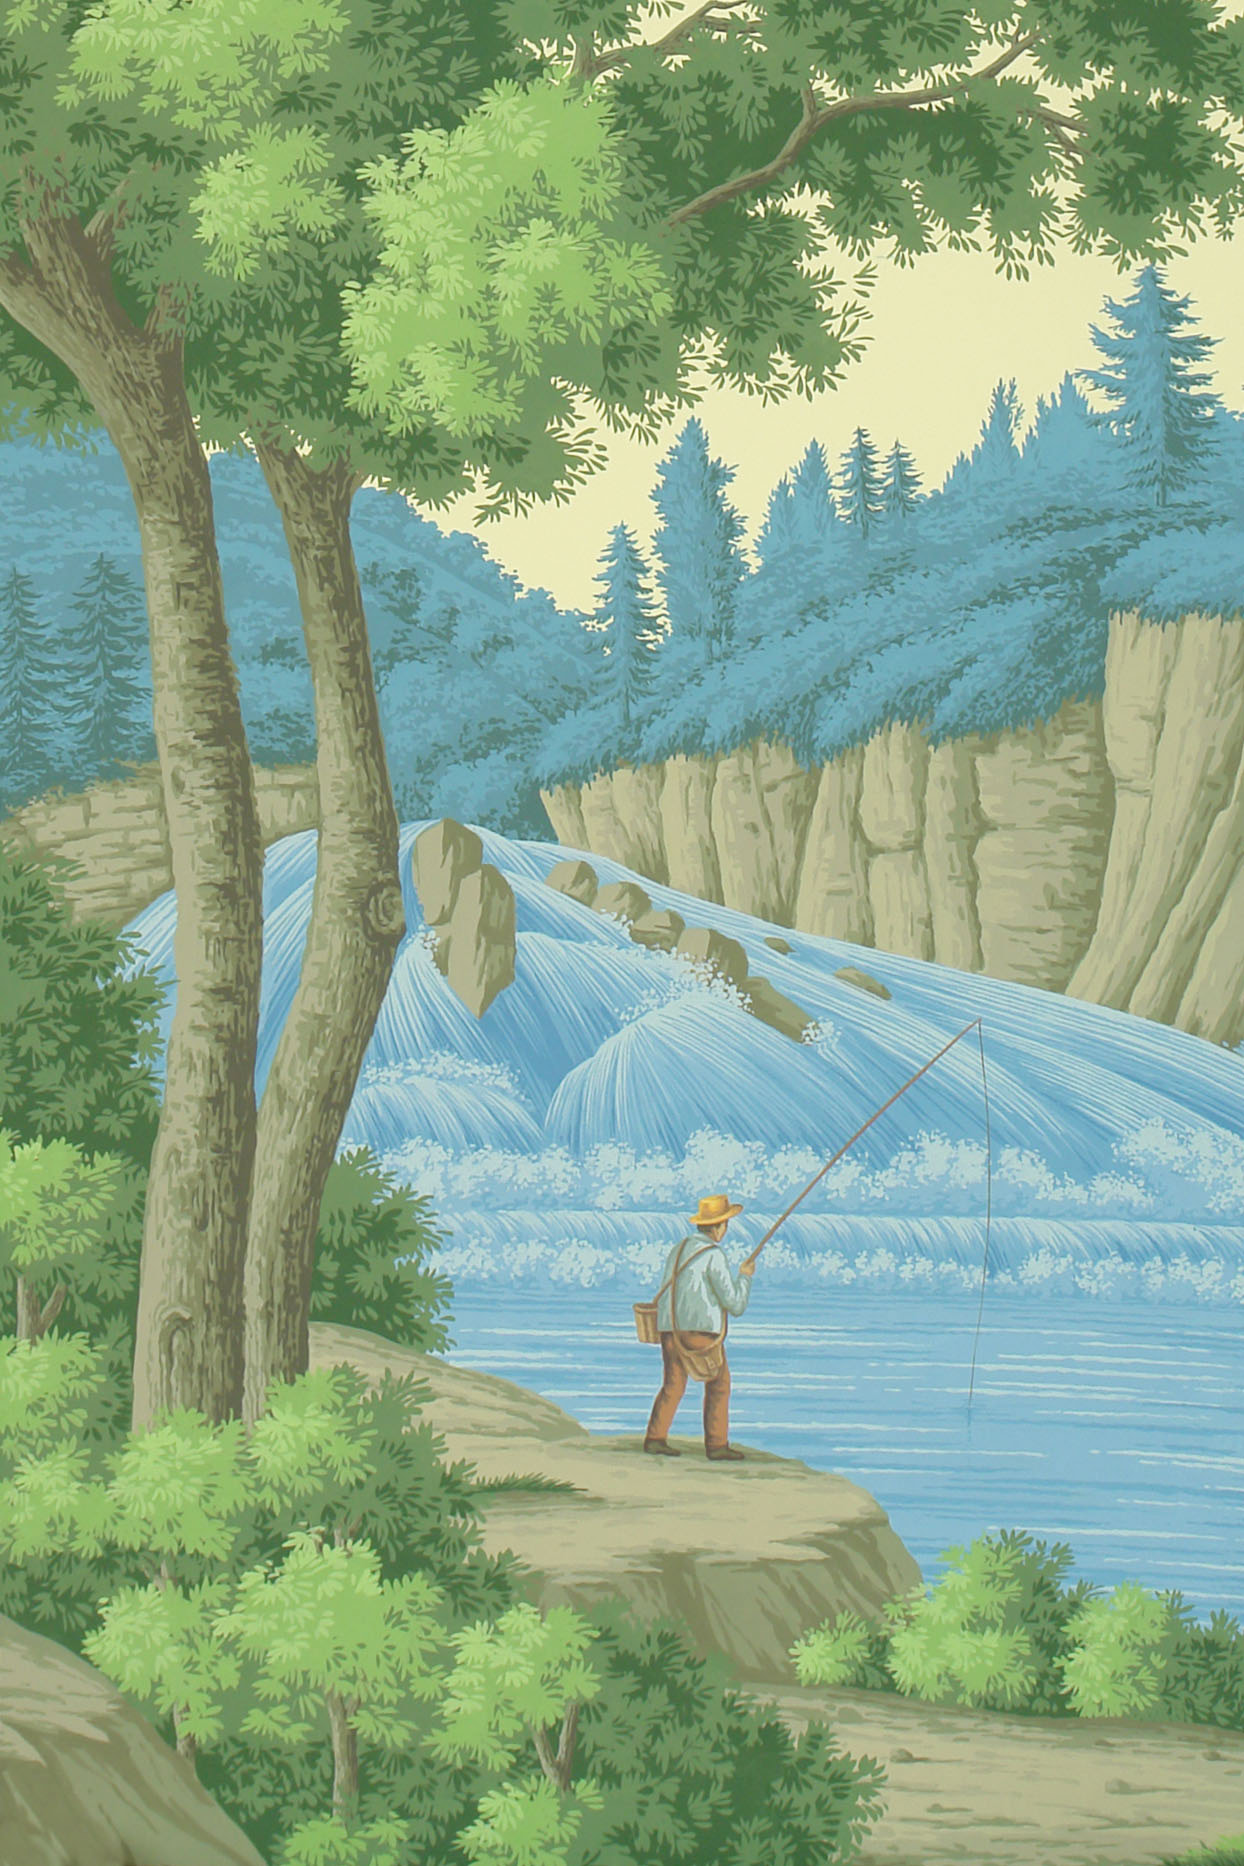 'North American River Views' in Dufour colourway on scenic paper